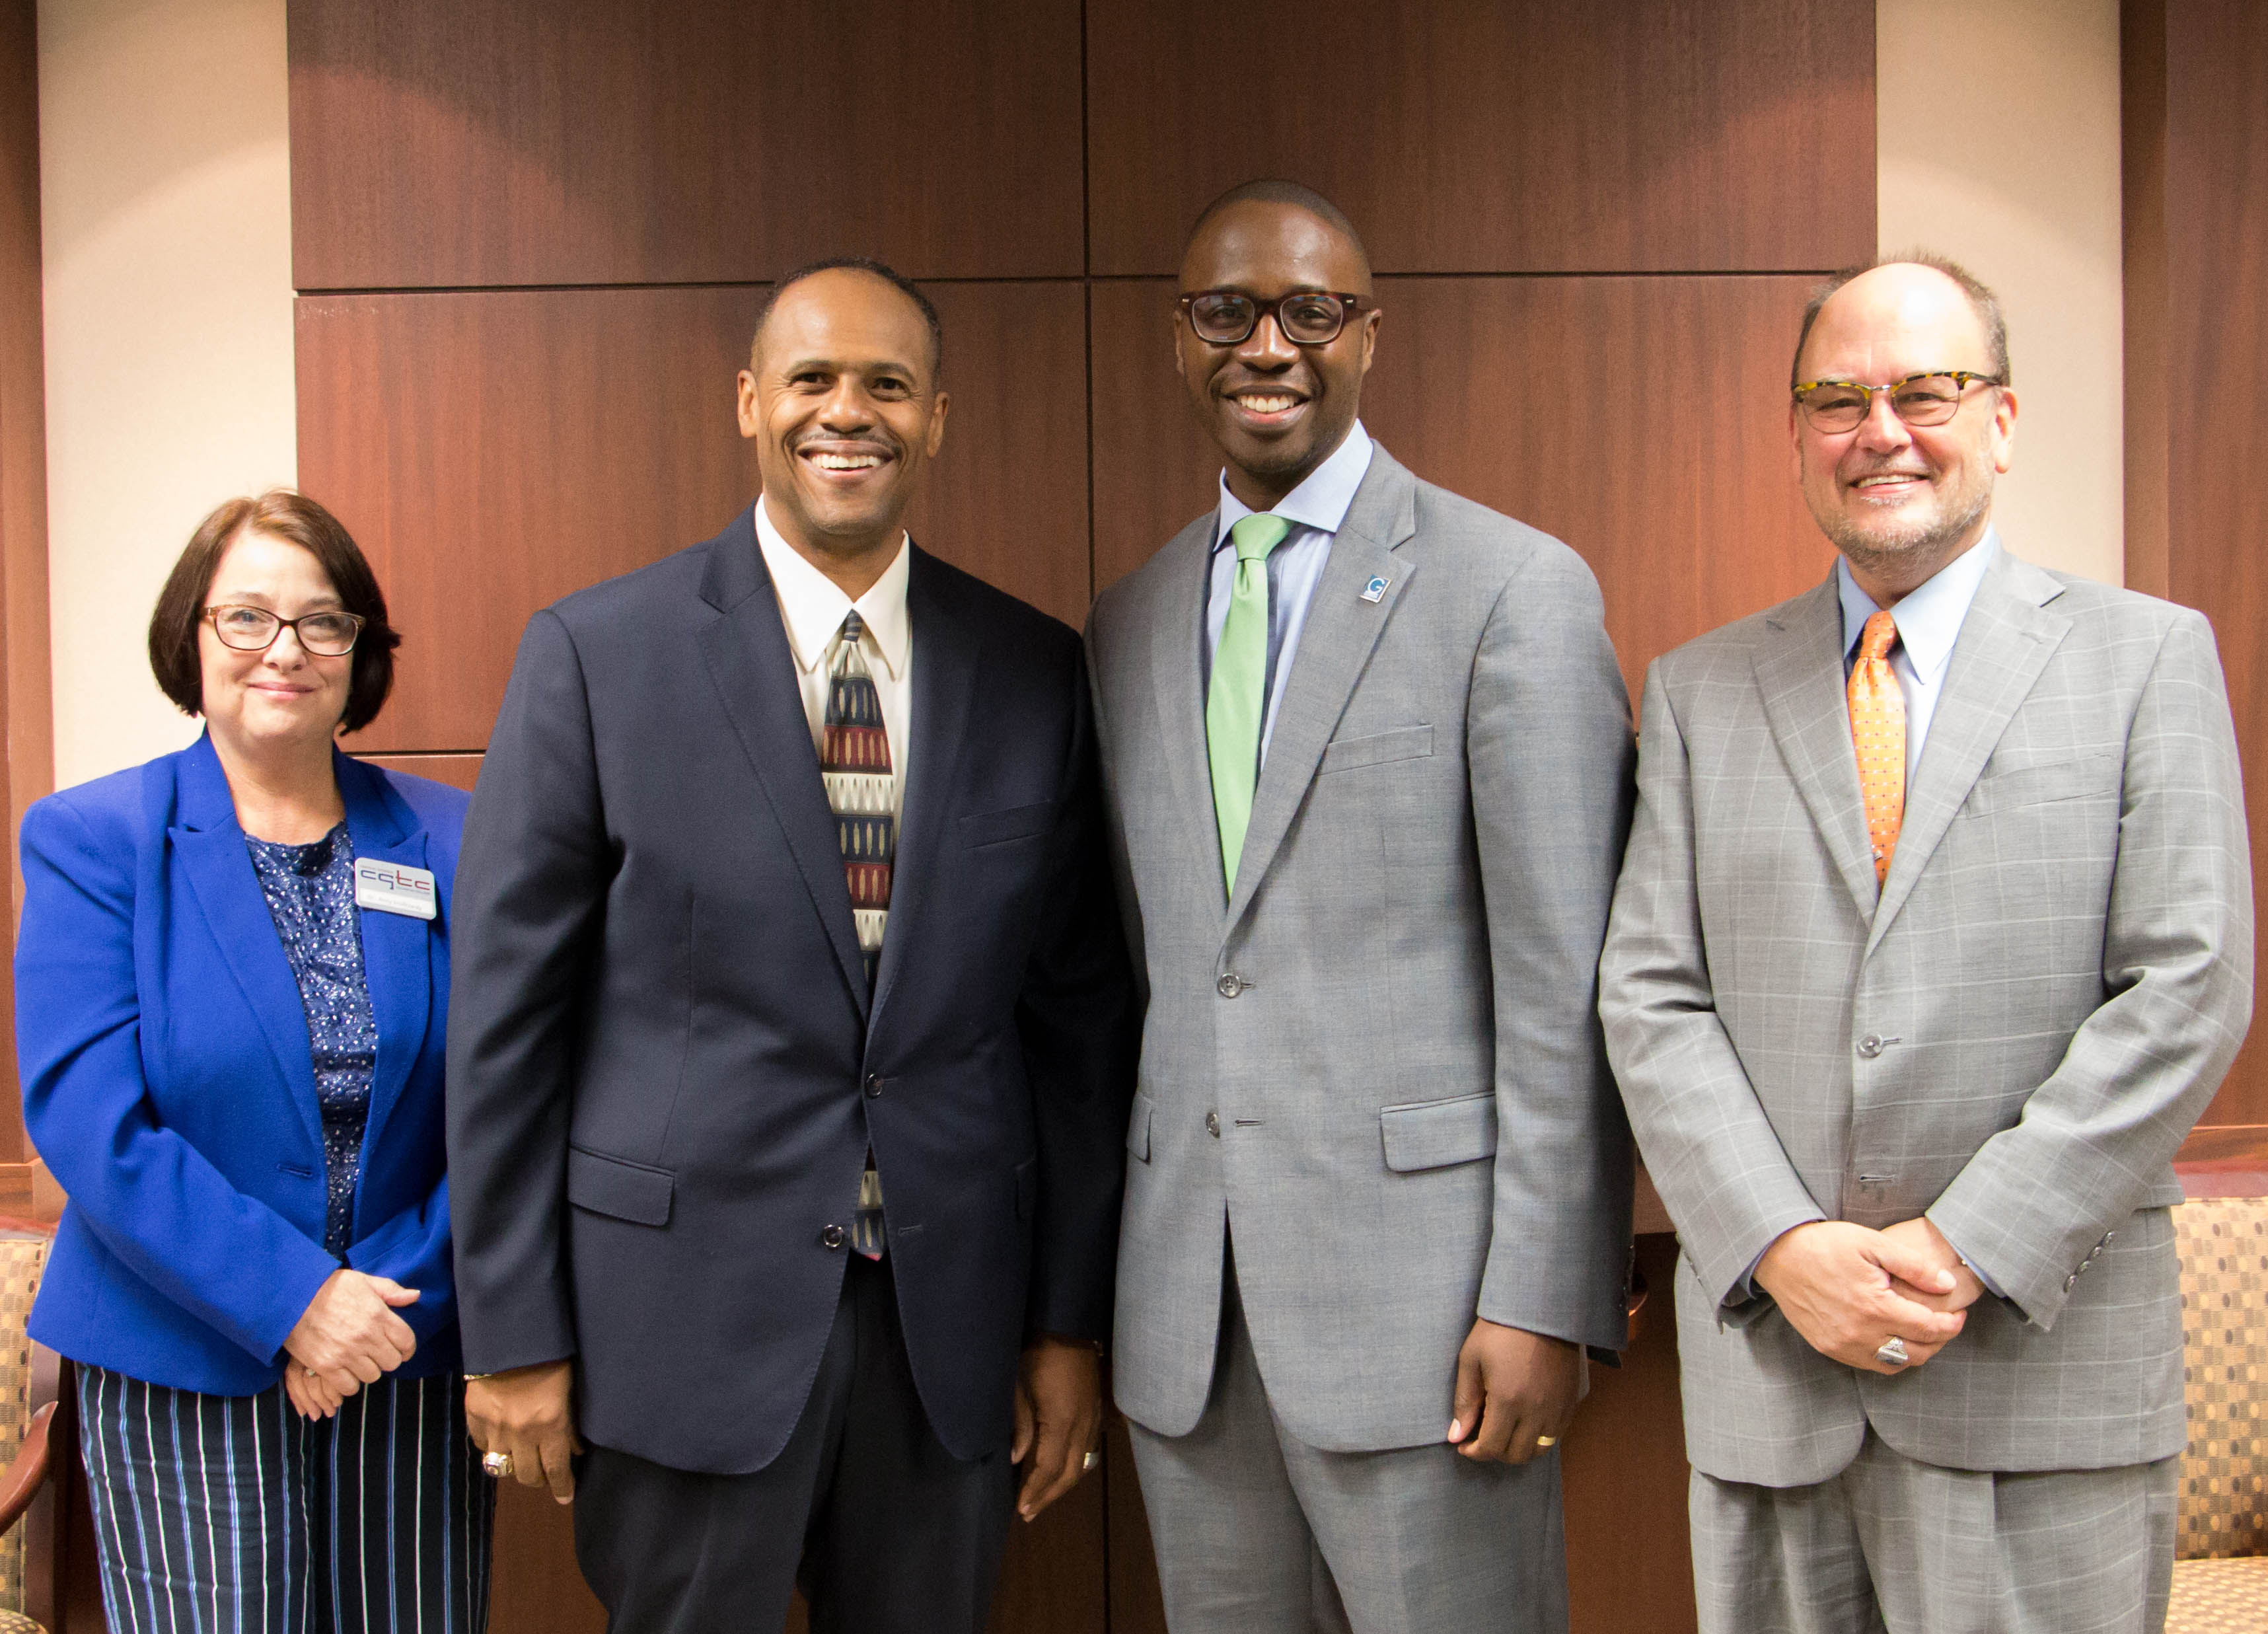 Dr. Amy Holloway, CGTC’s vice president for Academic Affairs; Dr. Ivan H. Allen, president of CGTC, Dr. Kirk A. Nooks, president of Gordon State College, and Dr. C. Jeffrey Knighton, provost and vice president for Academic Affairs at Gordon State College gather following the signing of a first articulation agreement between the two institutions. 